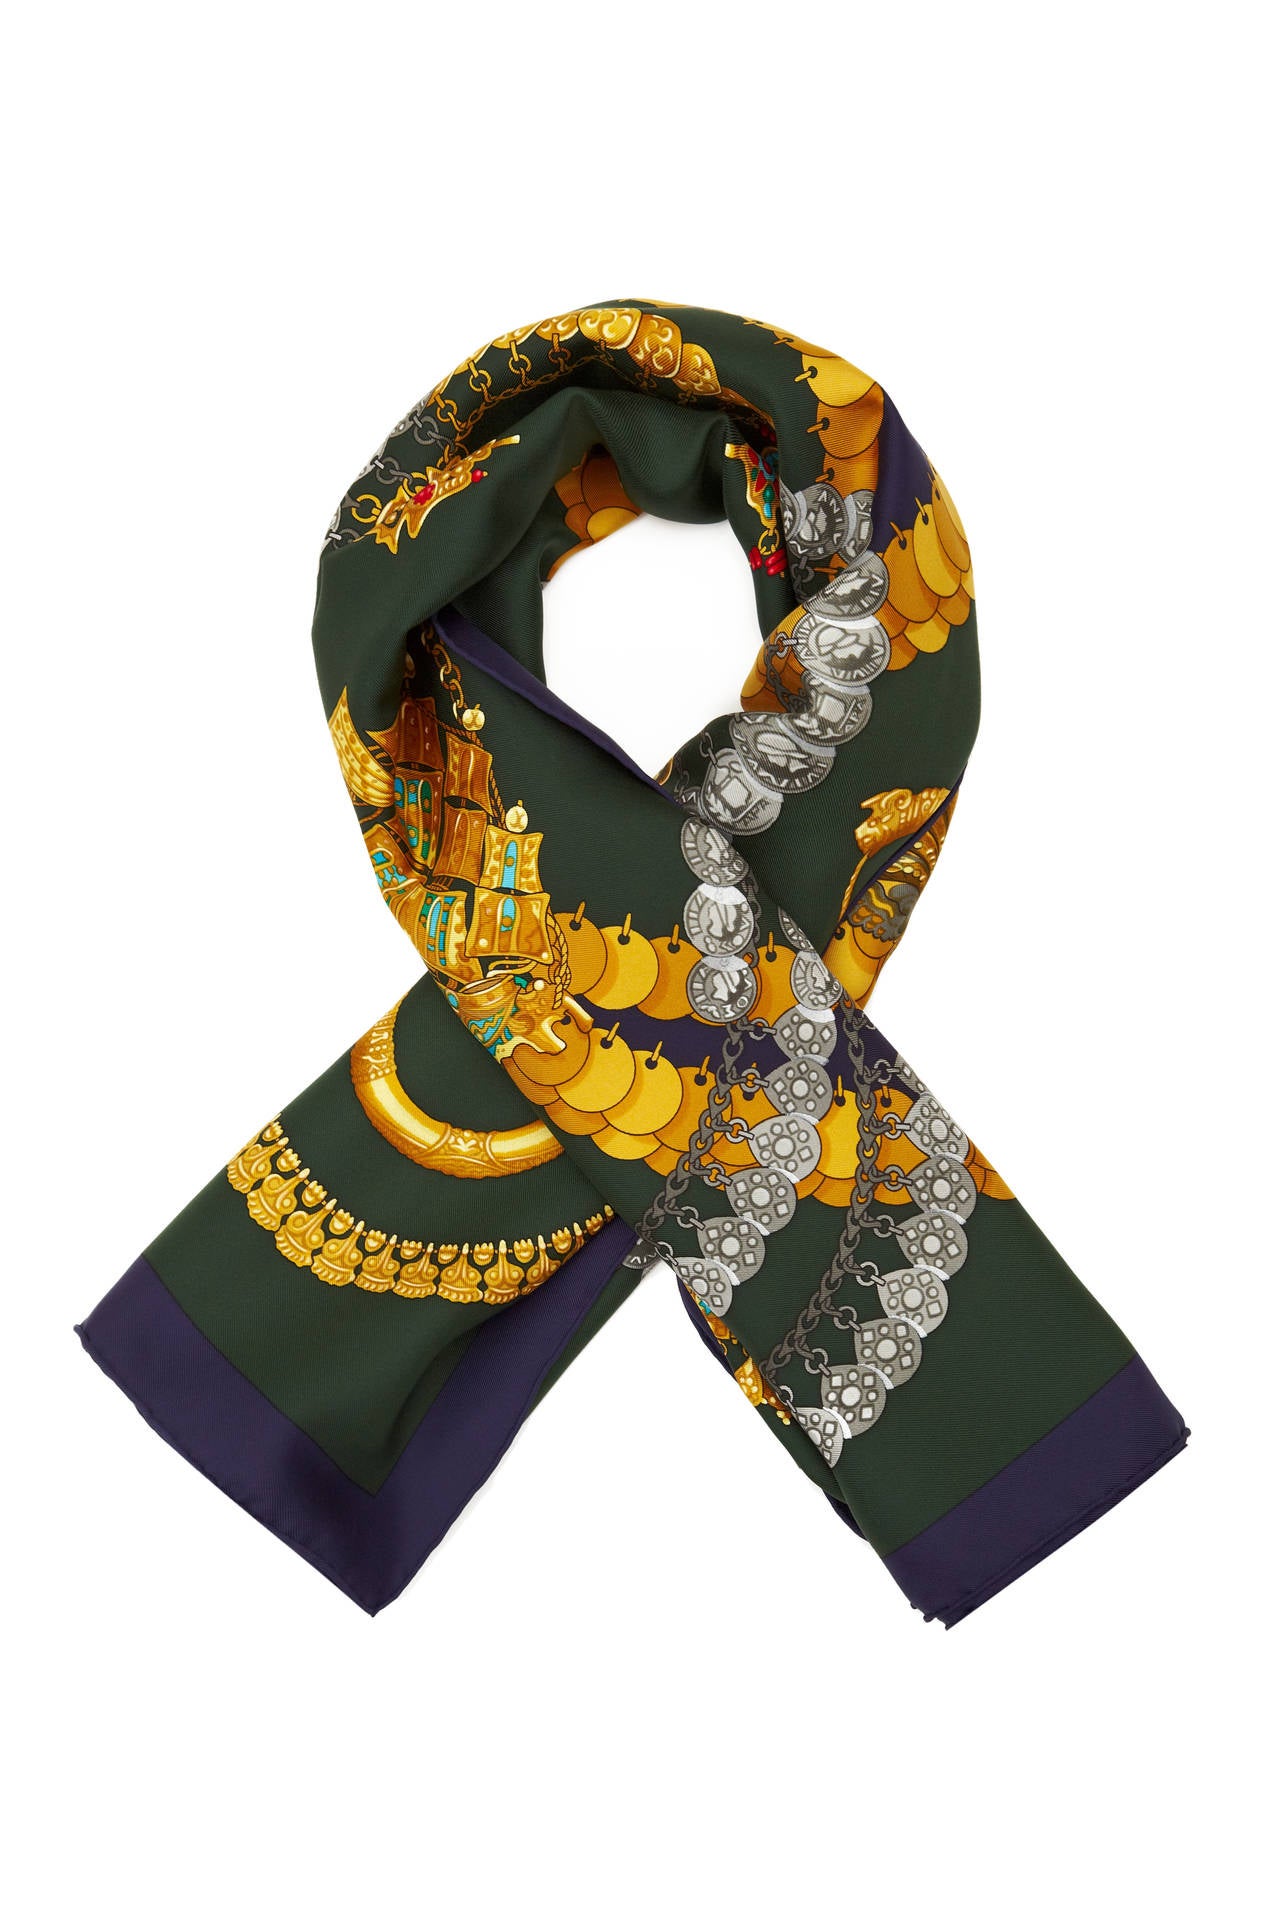 Beautiful dark green silk twill scarf with pretty chain and coin print. This scarf was designed by Julia Abadle and first issued in 1994/95 with reissues in 1997 and 1999. In excellent condition.

Measures 90cm x 90cm/ 35.5”x 35.5”